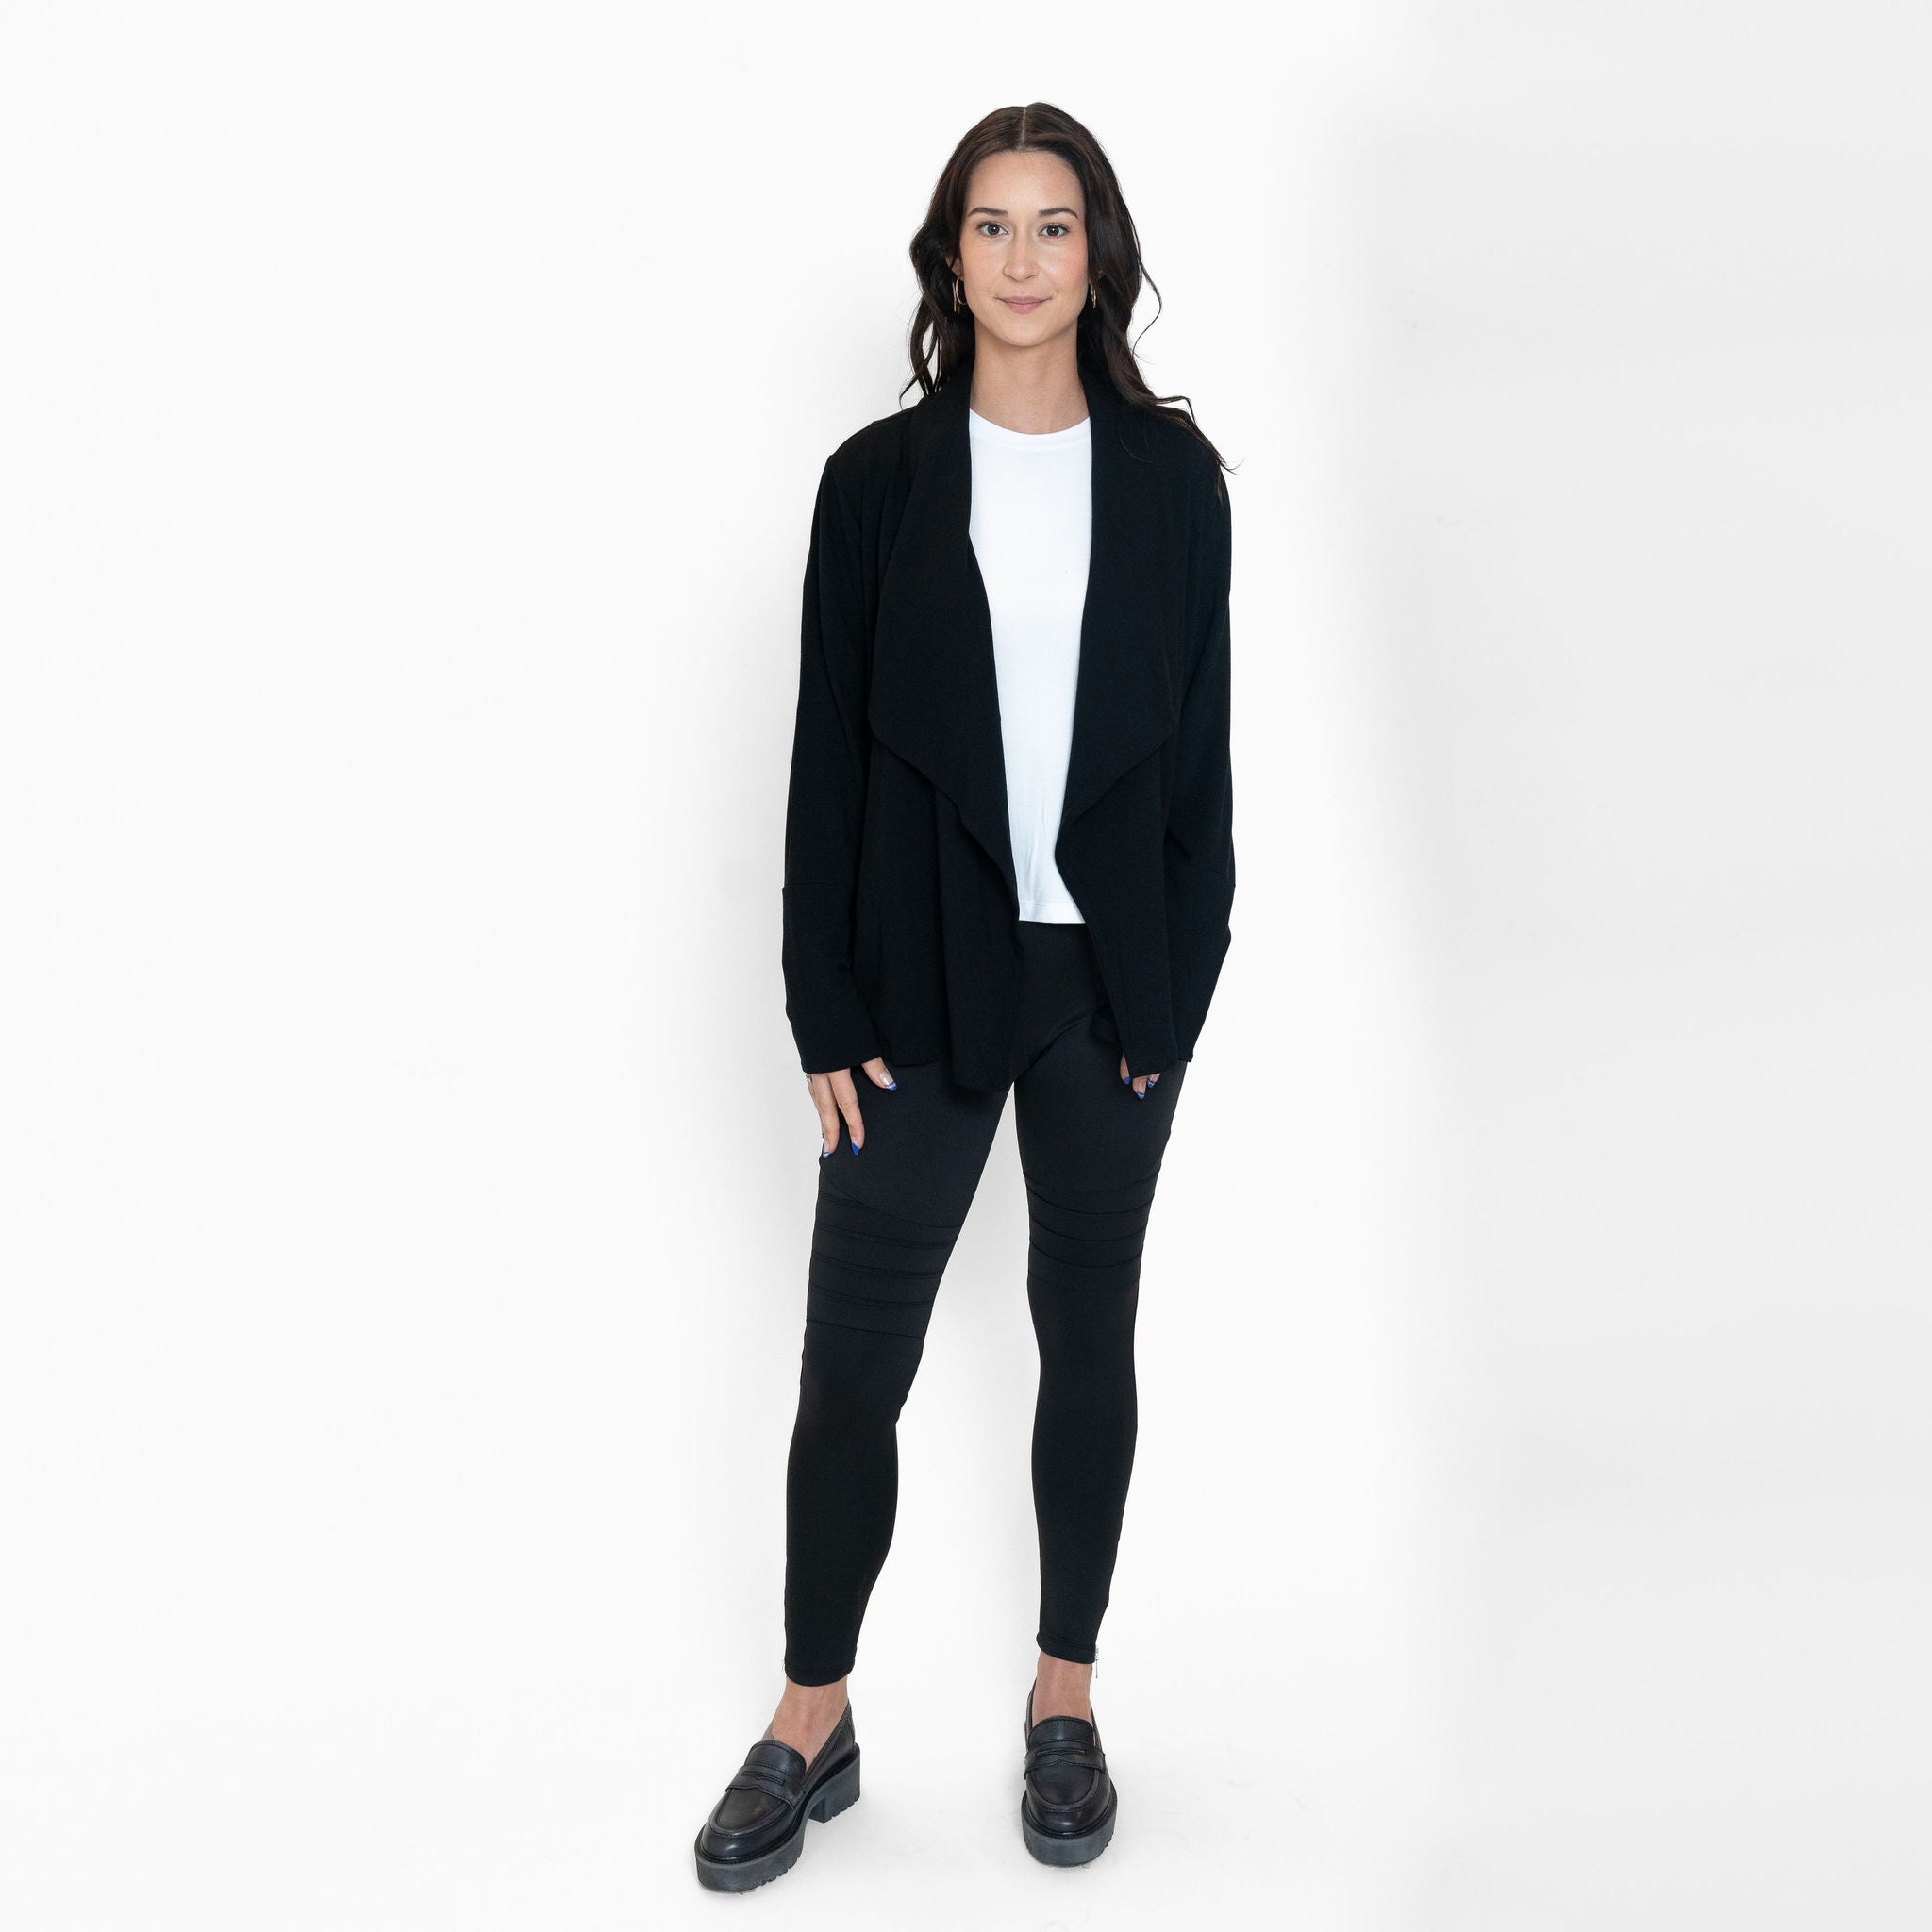 Woman wearing loose white crew neck t-shirt and black cardigan with fitted black sweatpants